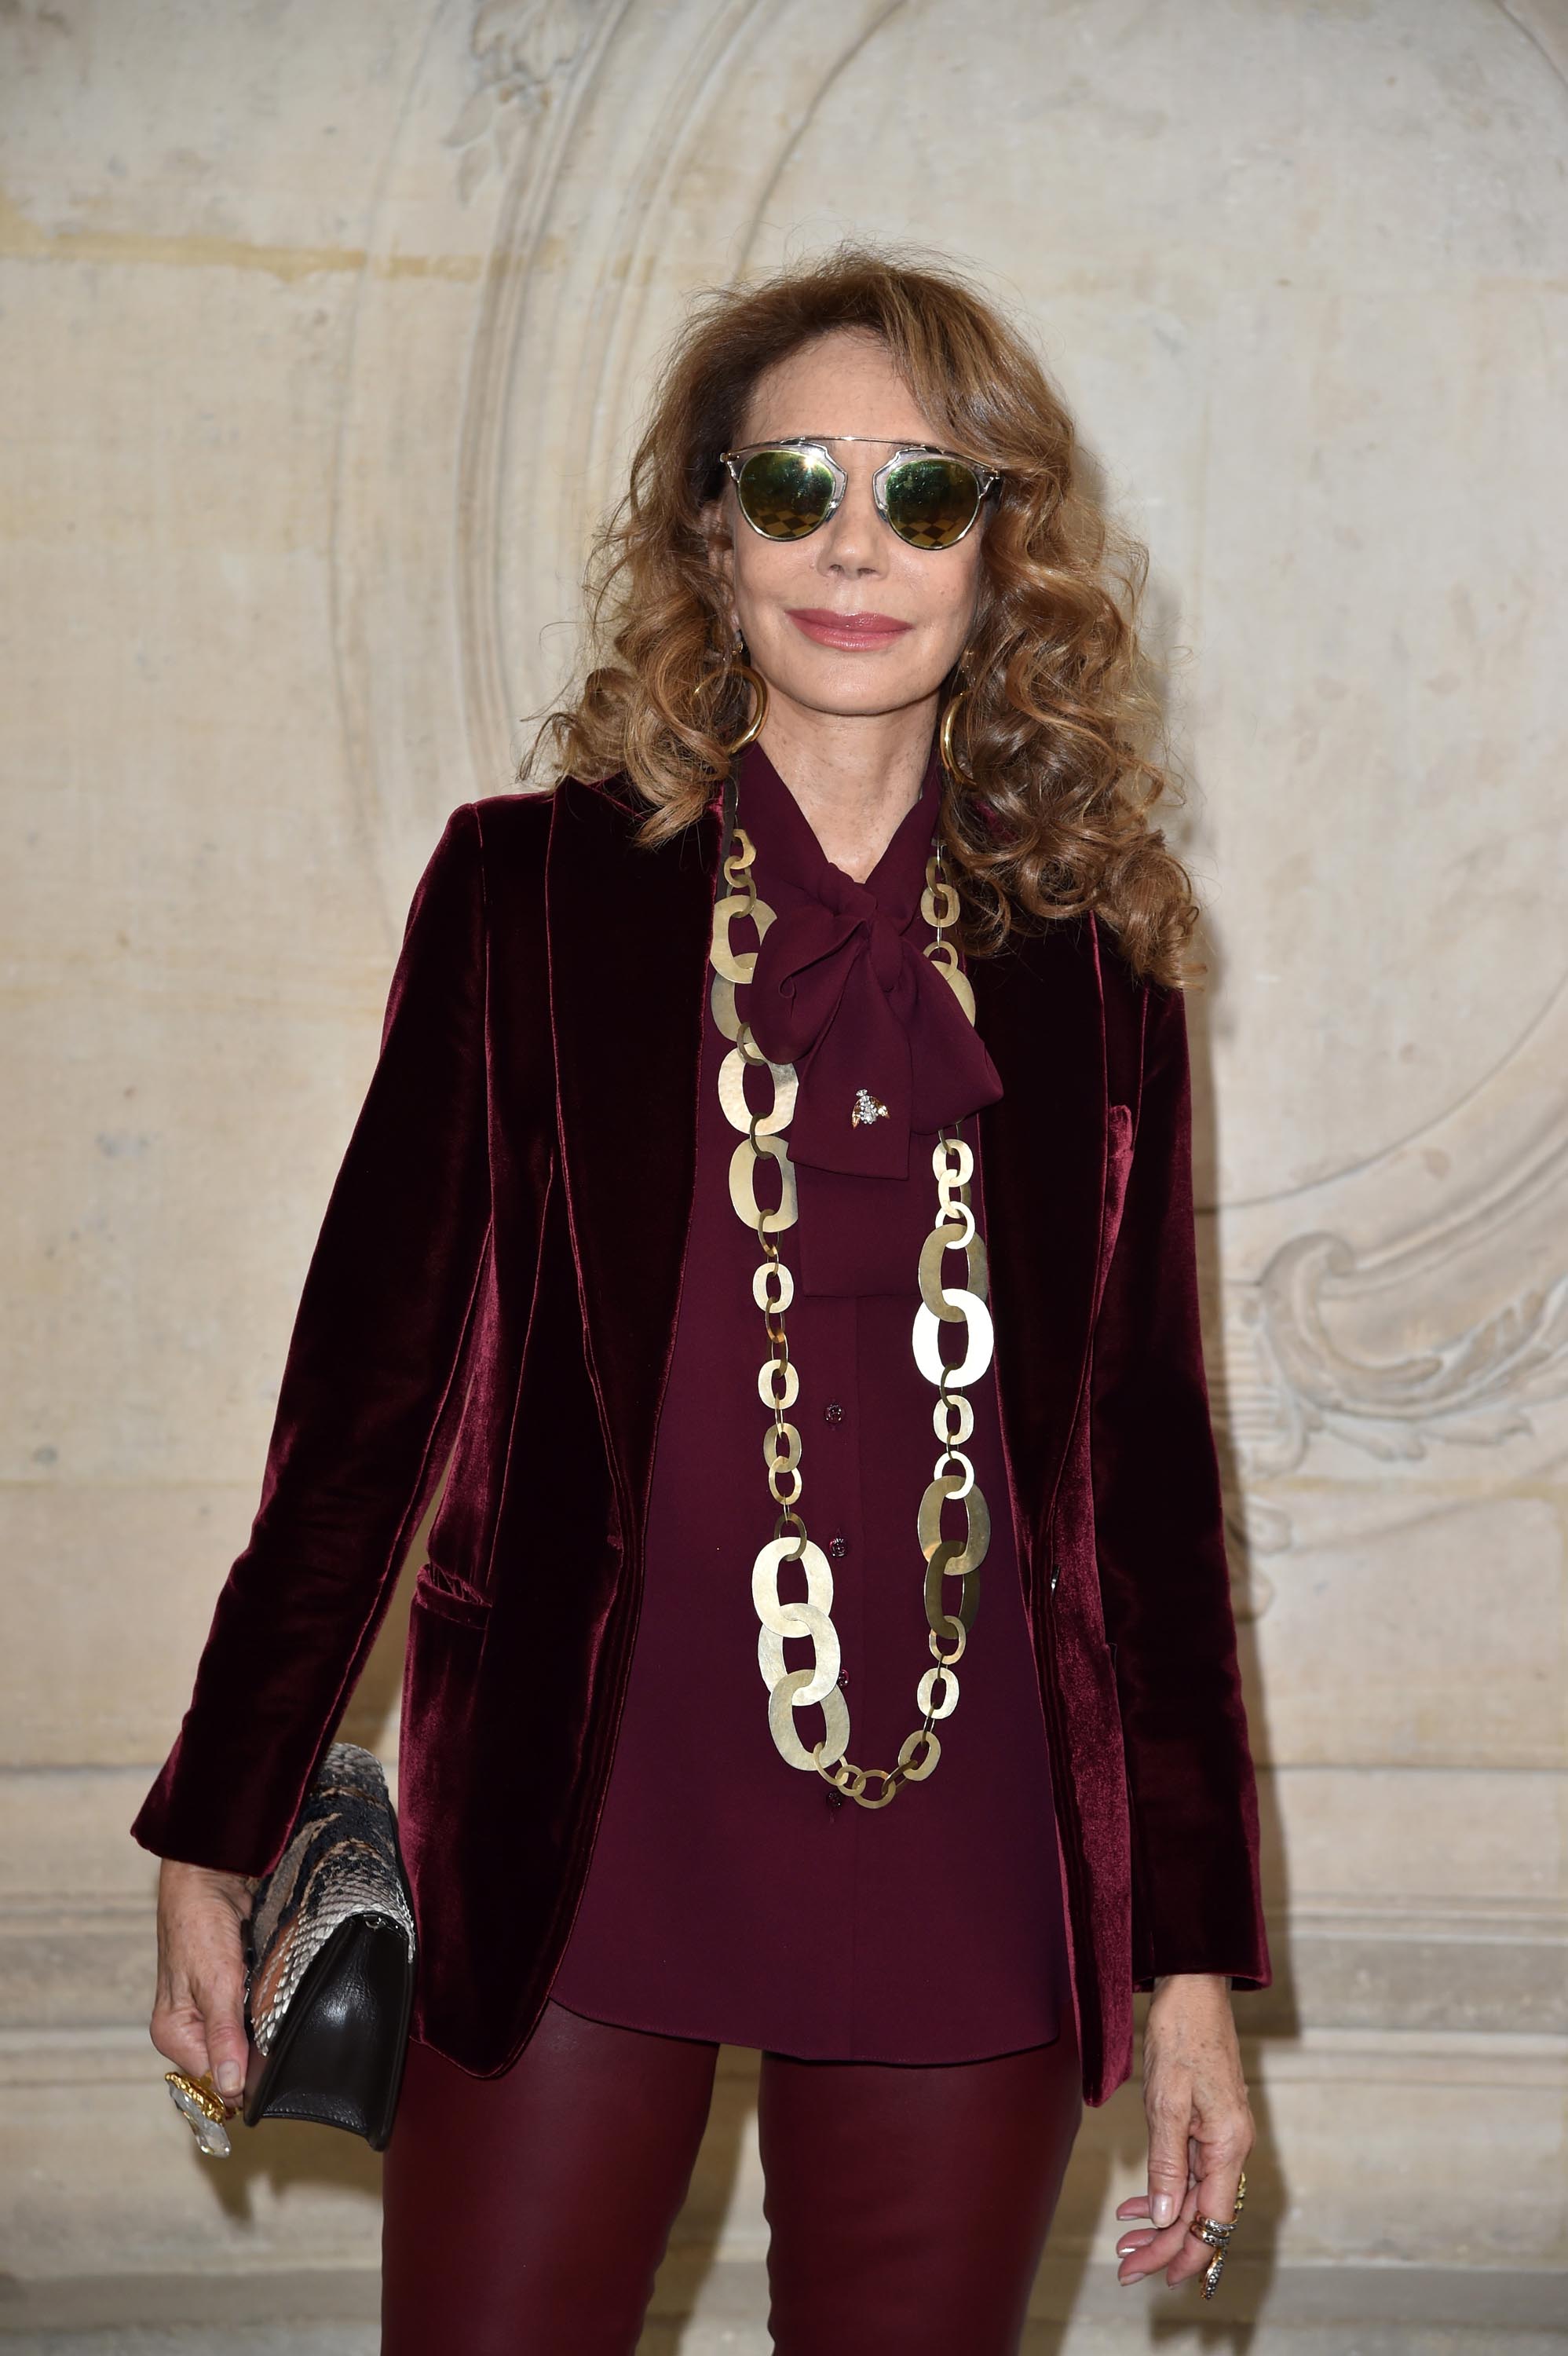 Marisa Berenson attends the Christian Dior show